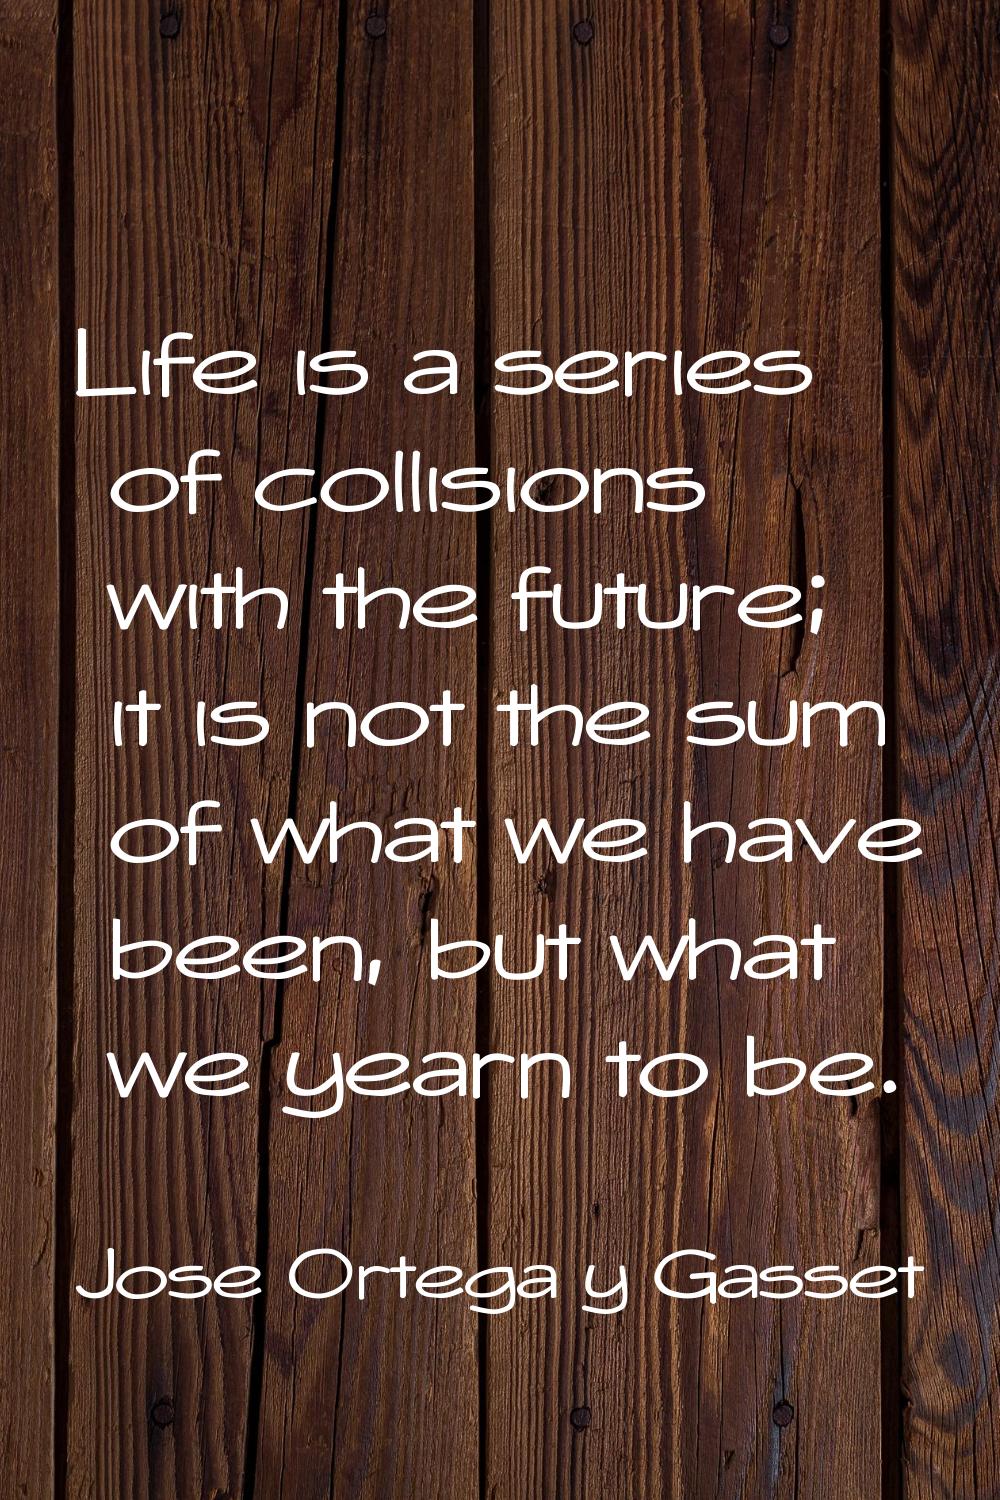 Life is a series of collisions with the future; it is not the sum of what we have been, but what we